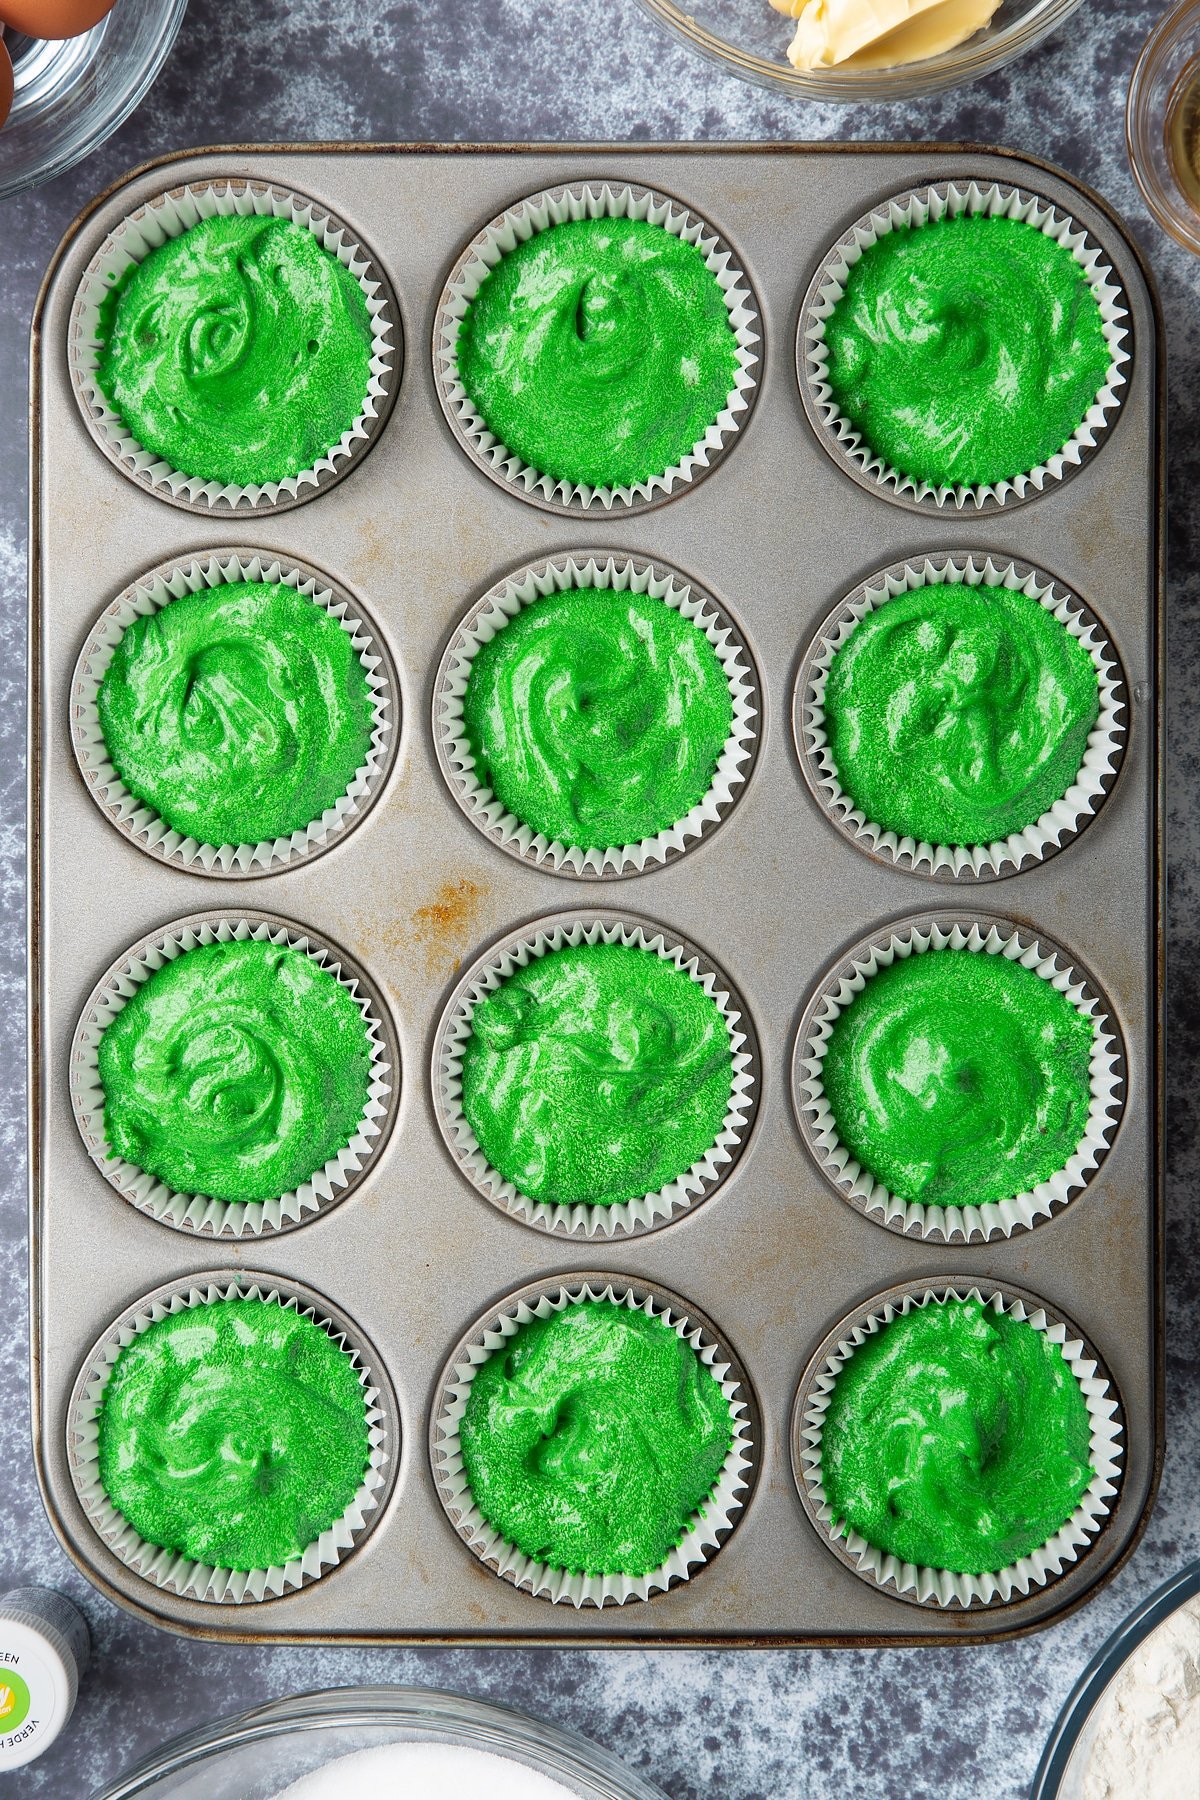 12 hole muffin tray lined with cupcake cases filled with green vanilla chocolate chip cake batter. Ingredients to make green monster cakes surround the tray. 